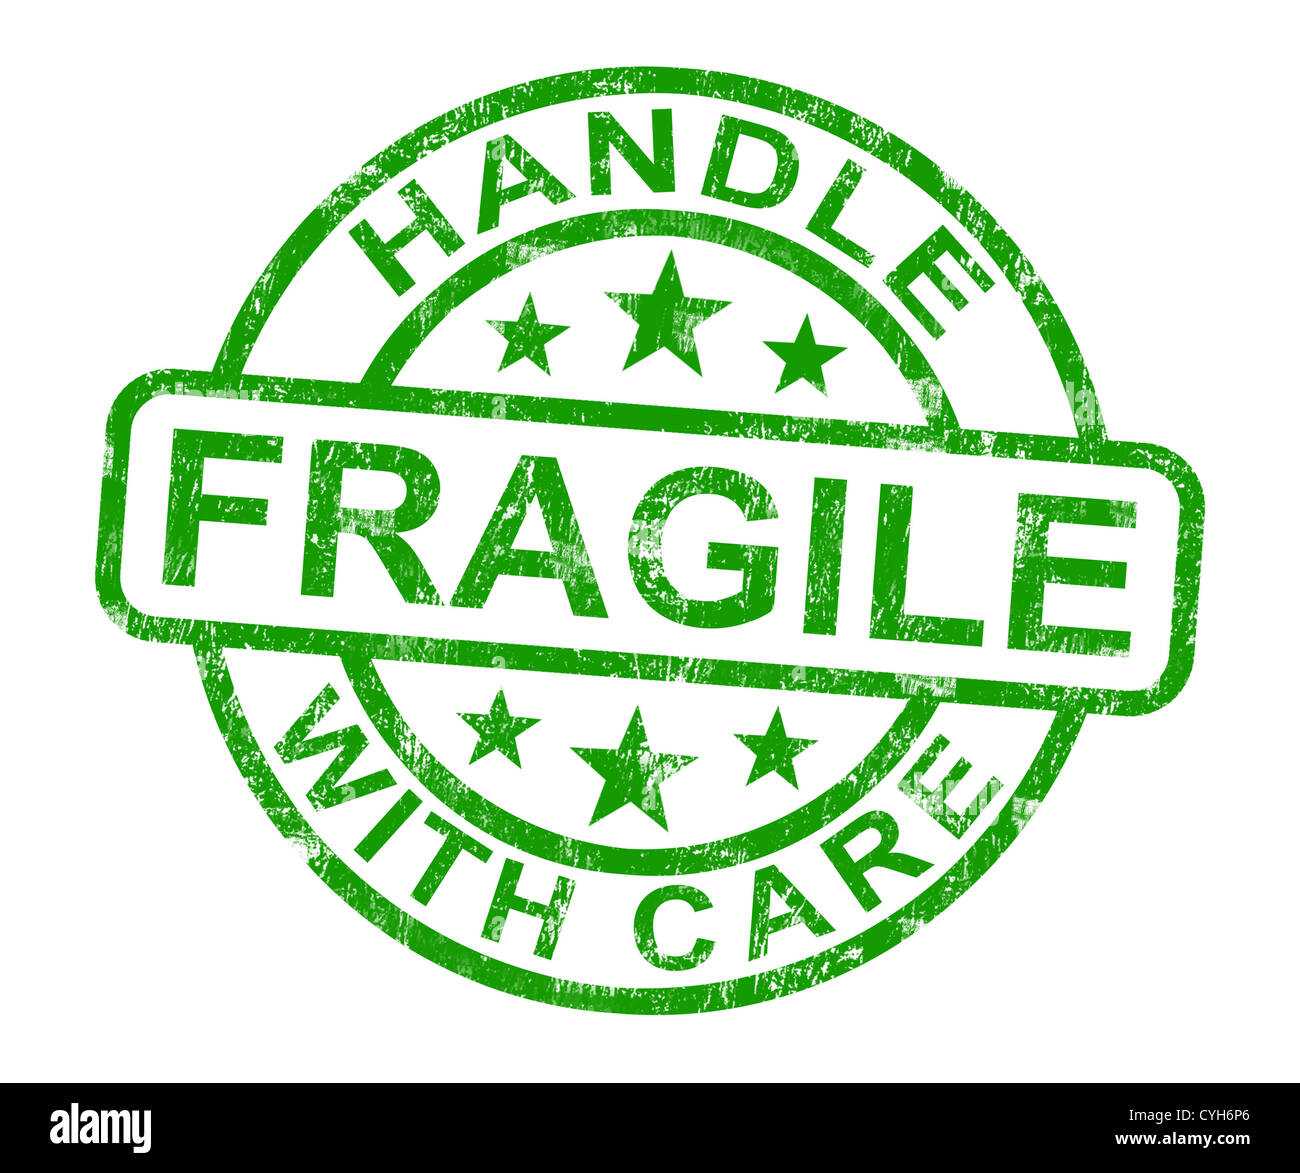 Fragile Handle With Care Stamp Showing Breakable Products Stock Photo Alamy